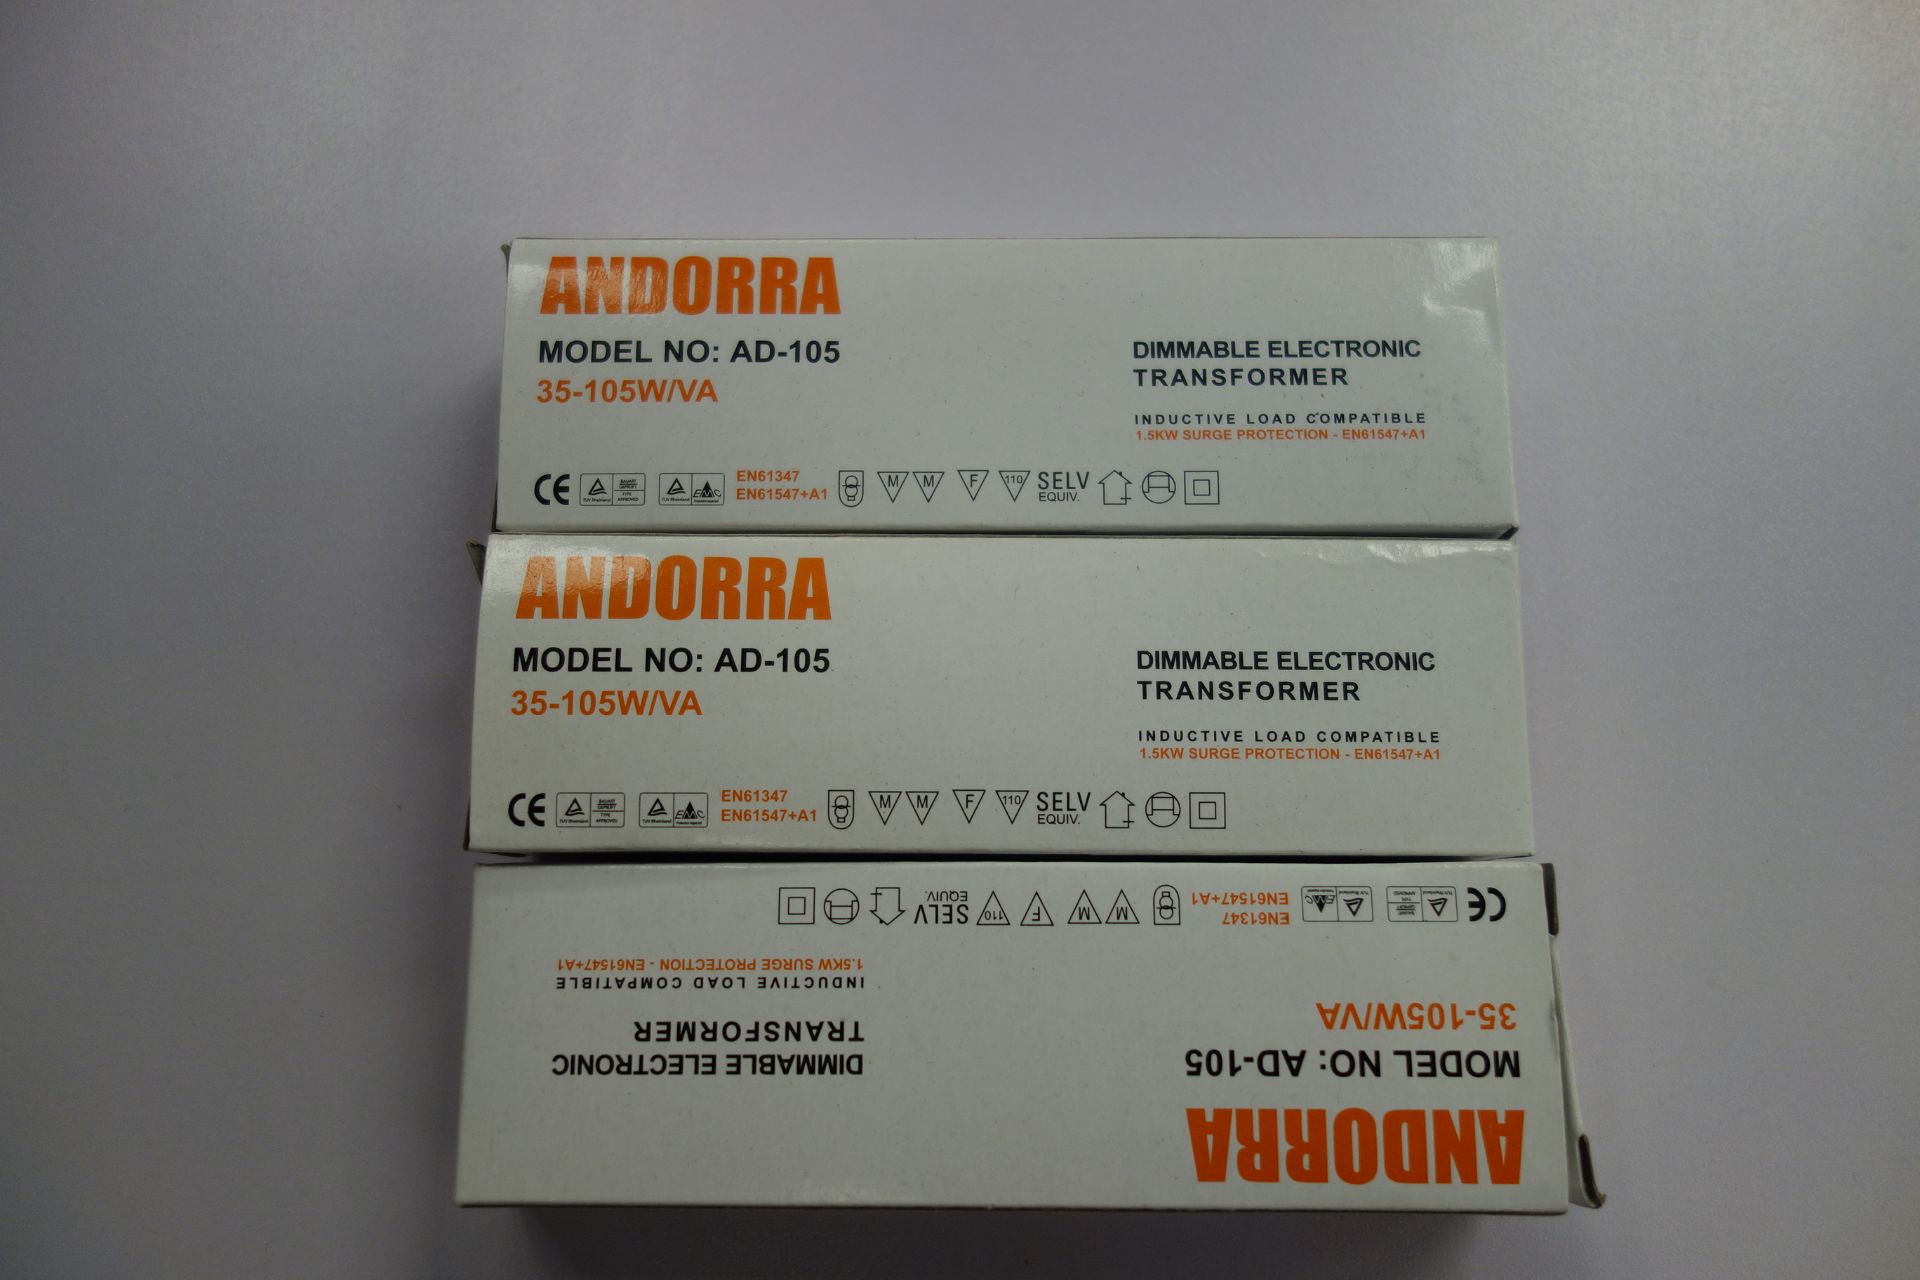 46 X Andorra AD 105 35-105W/VA Dimmable Electronic Transformer Inductive Load Compatible 1.5KW Surge